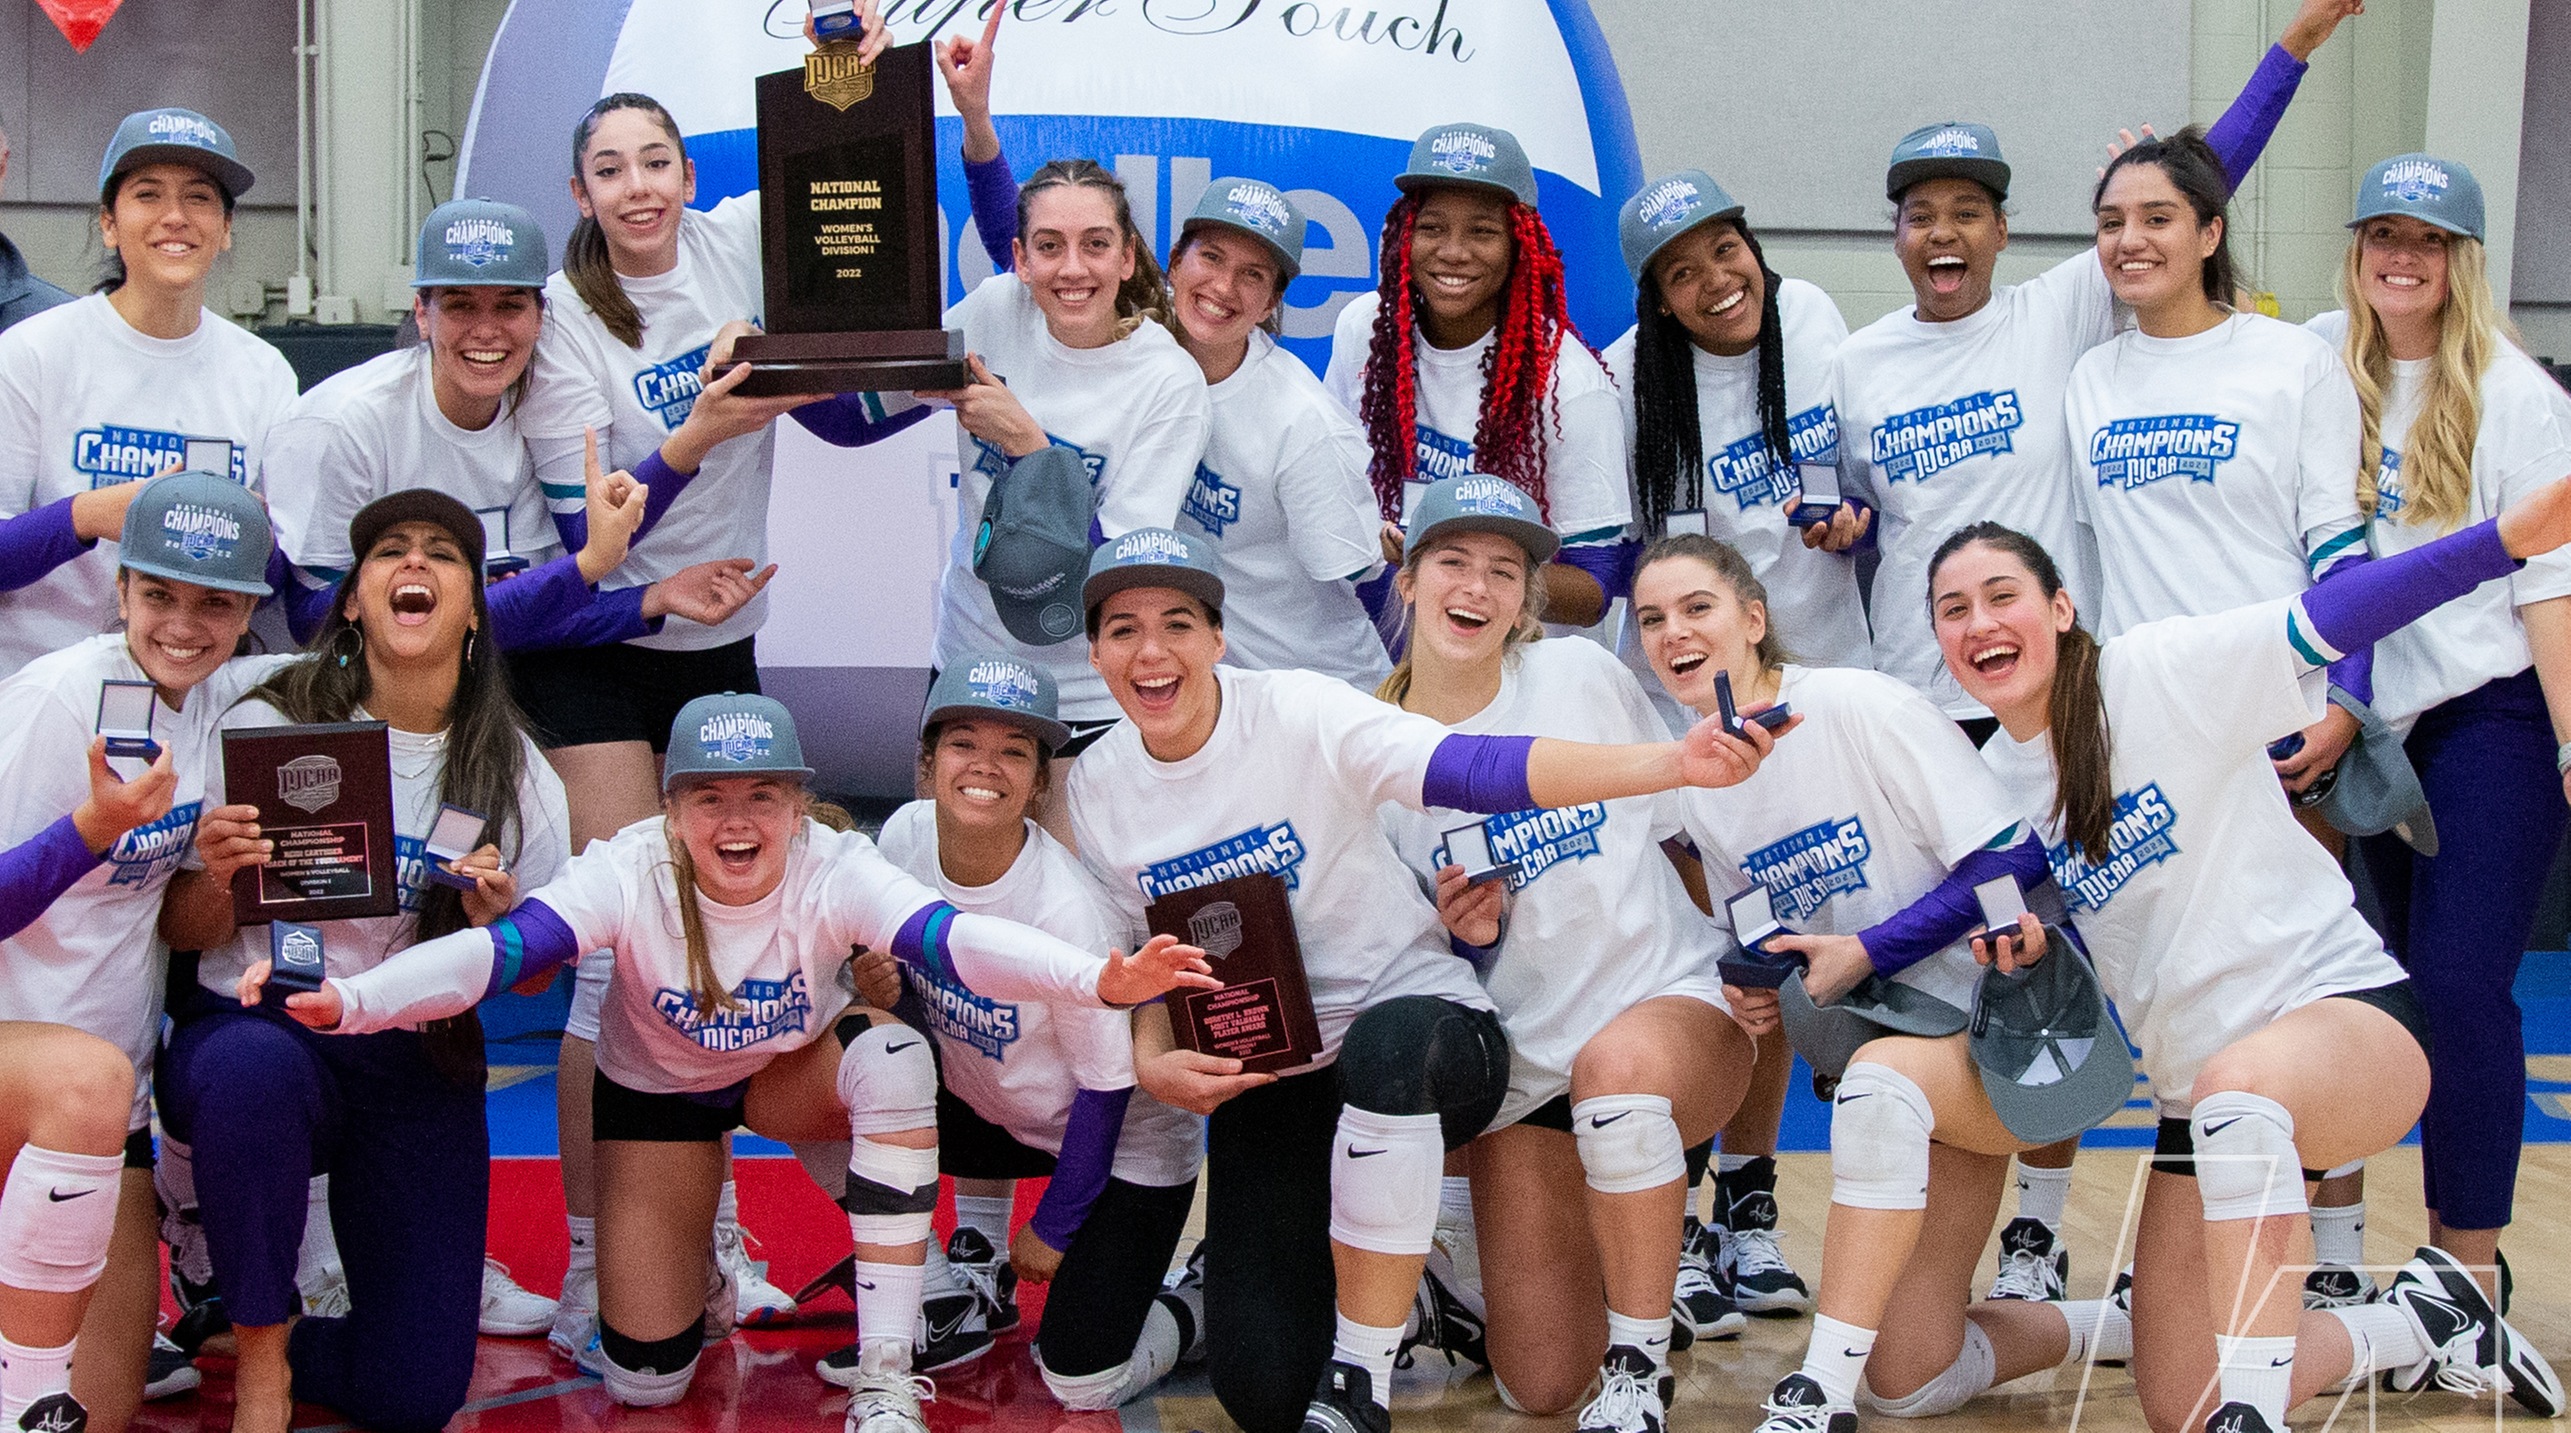 FSW wins their first National Championship (Photo by Nic Ryder)